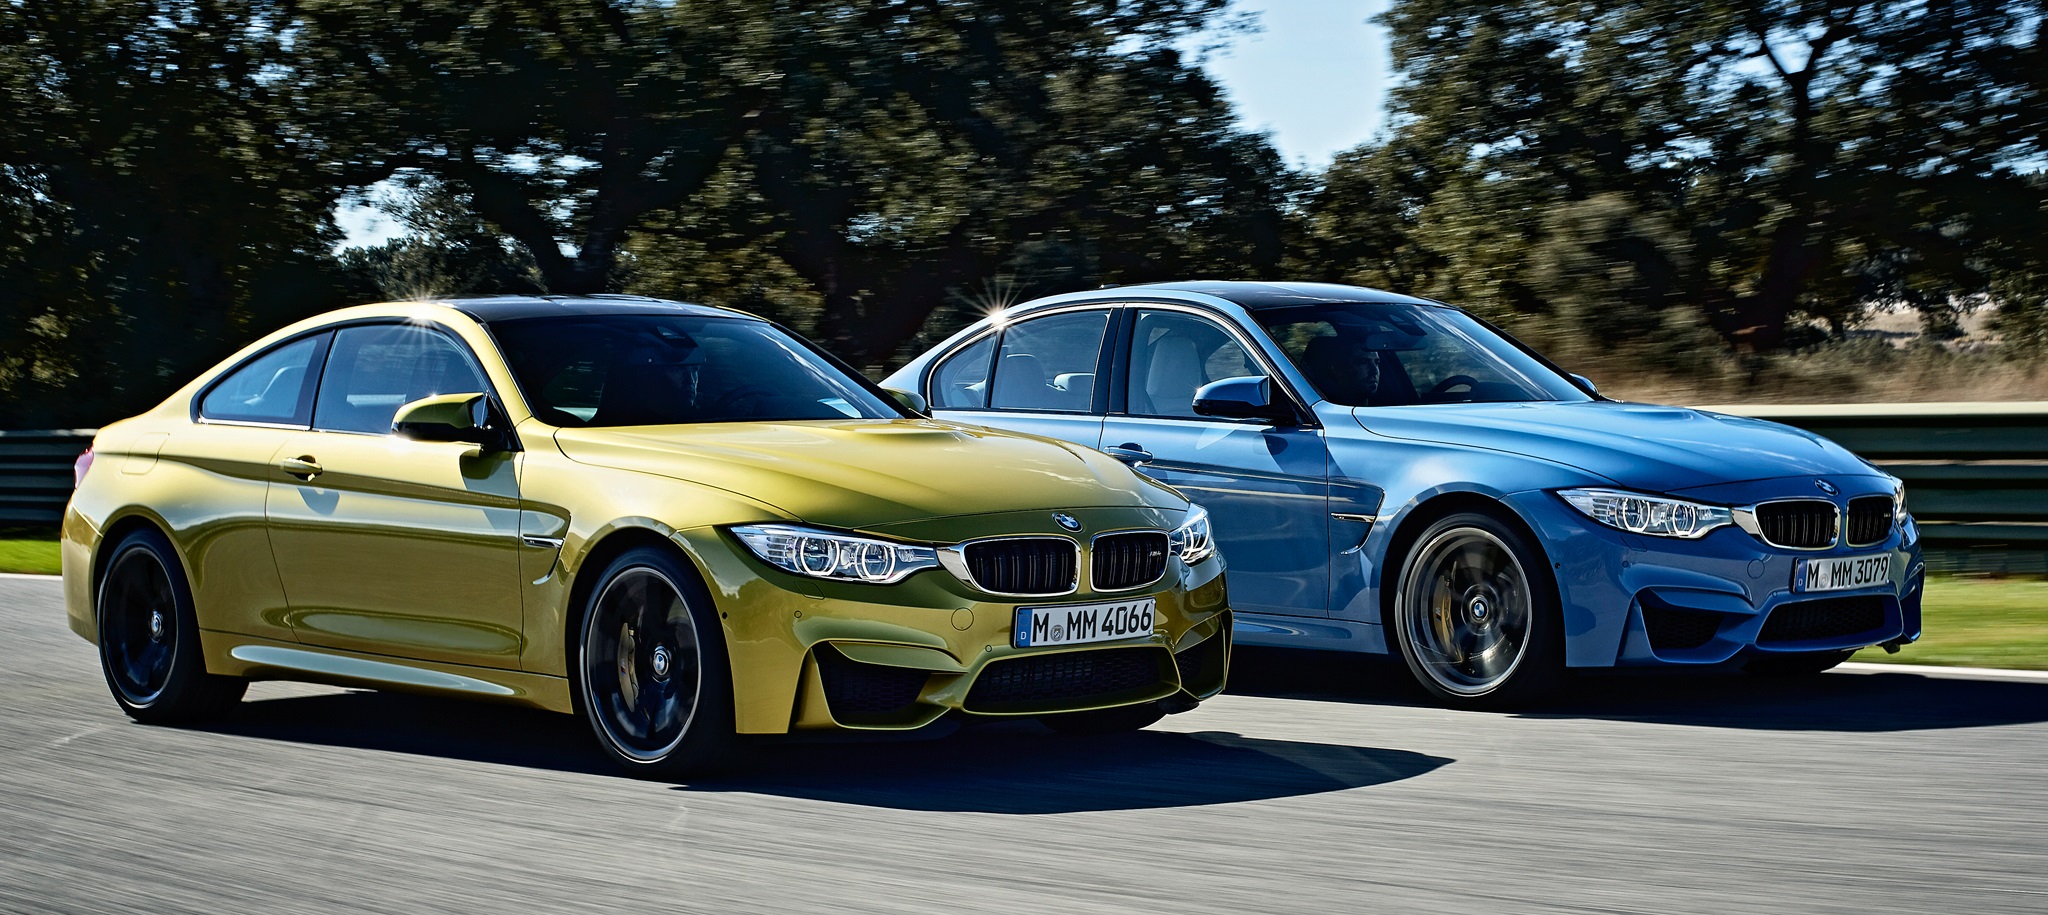 2015-bmw-m3-sedan-and-m4-coupe-front-view-in-motion